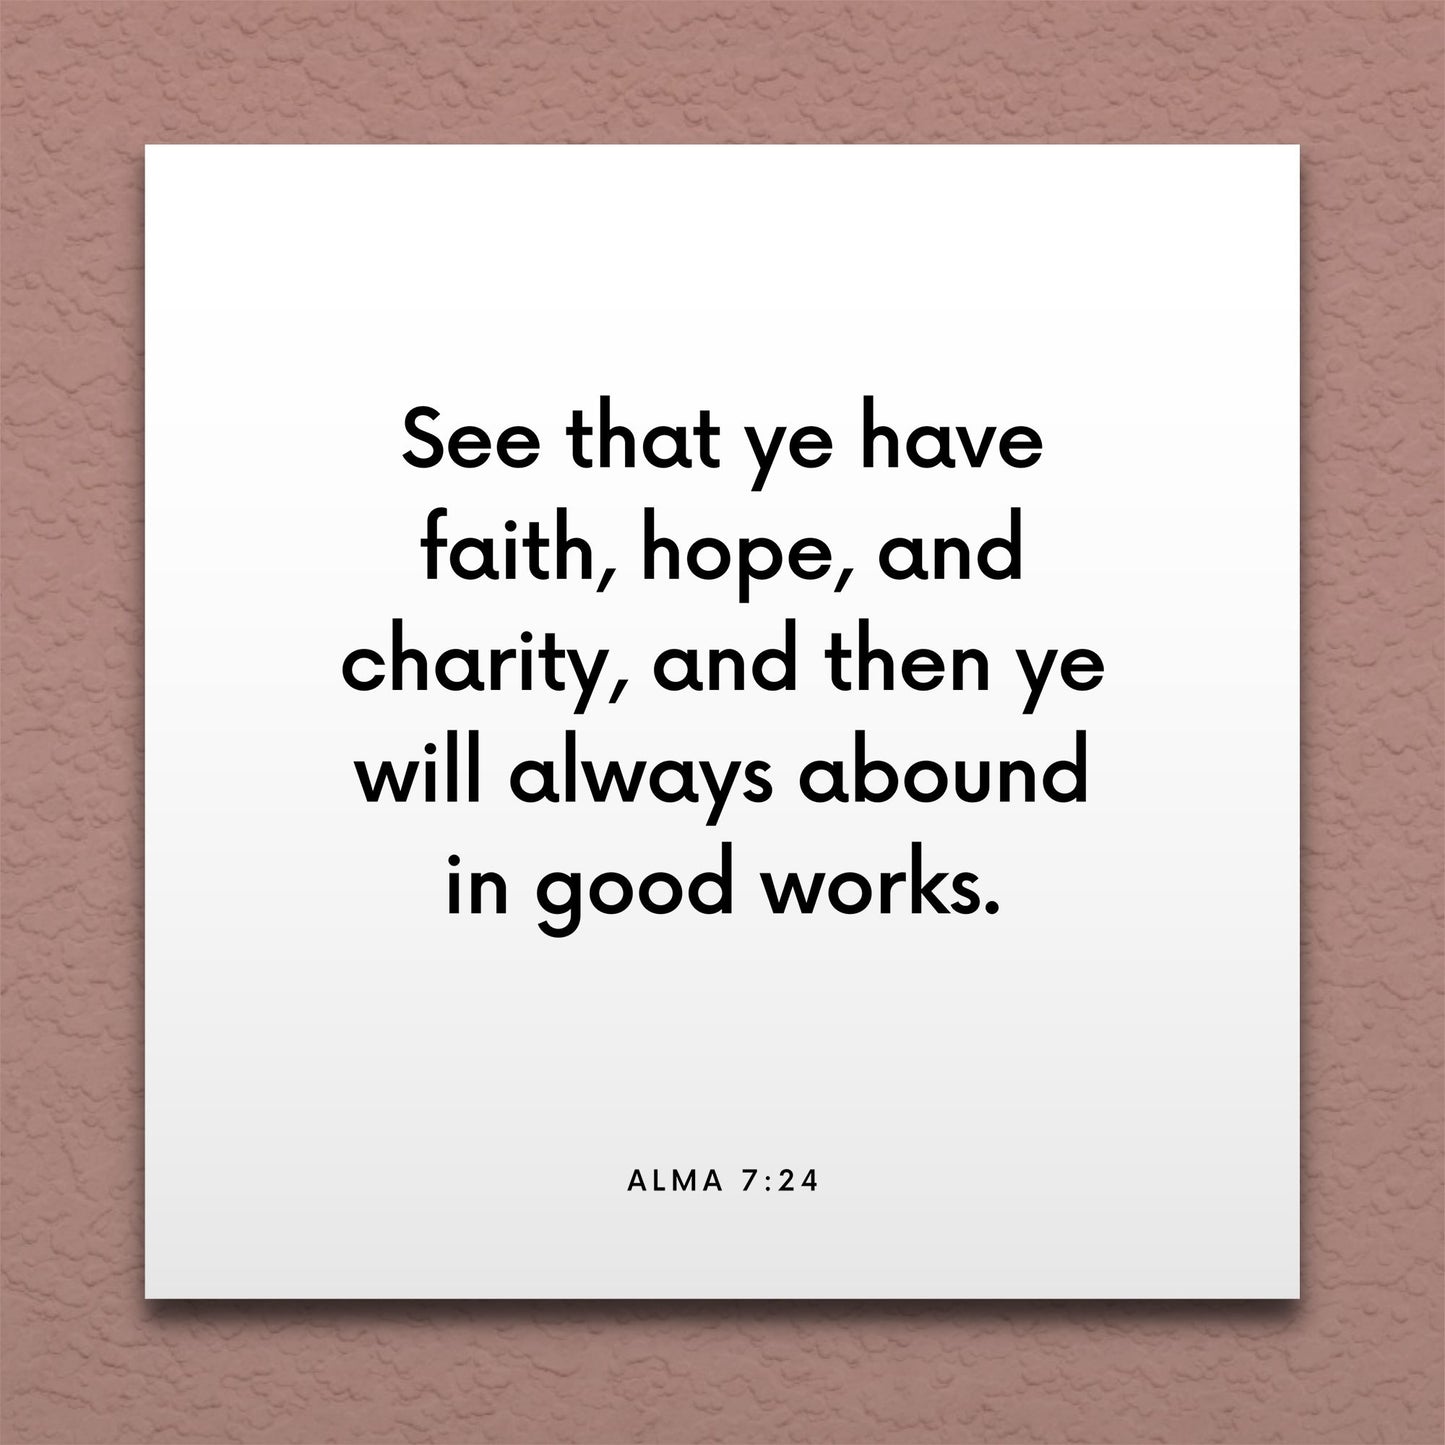 Wall-mounted scripture tile for Alma 7:24 - "See that ye have faith, hope, and charity"